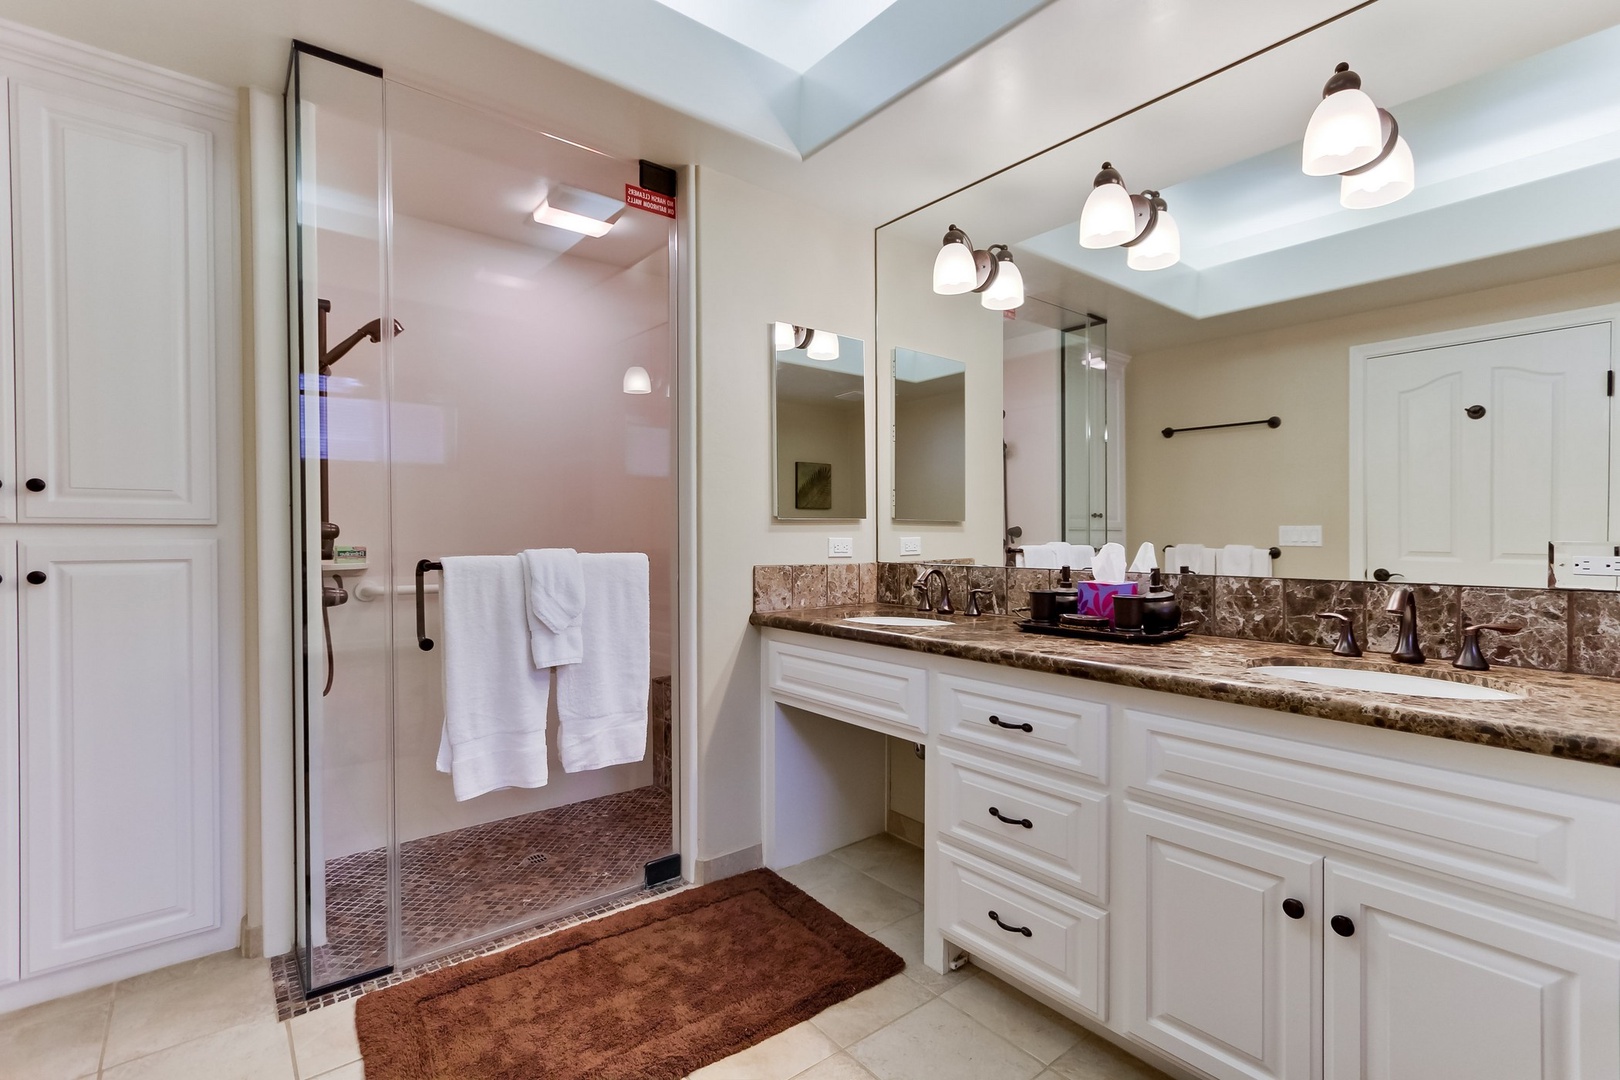 Primary suite bath with walk-in shower